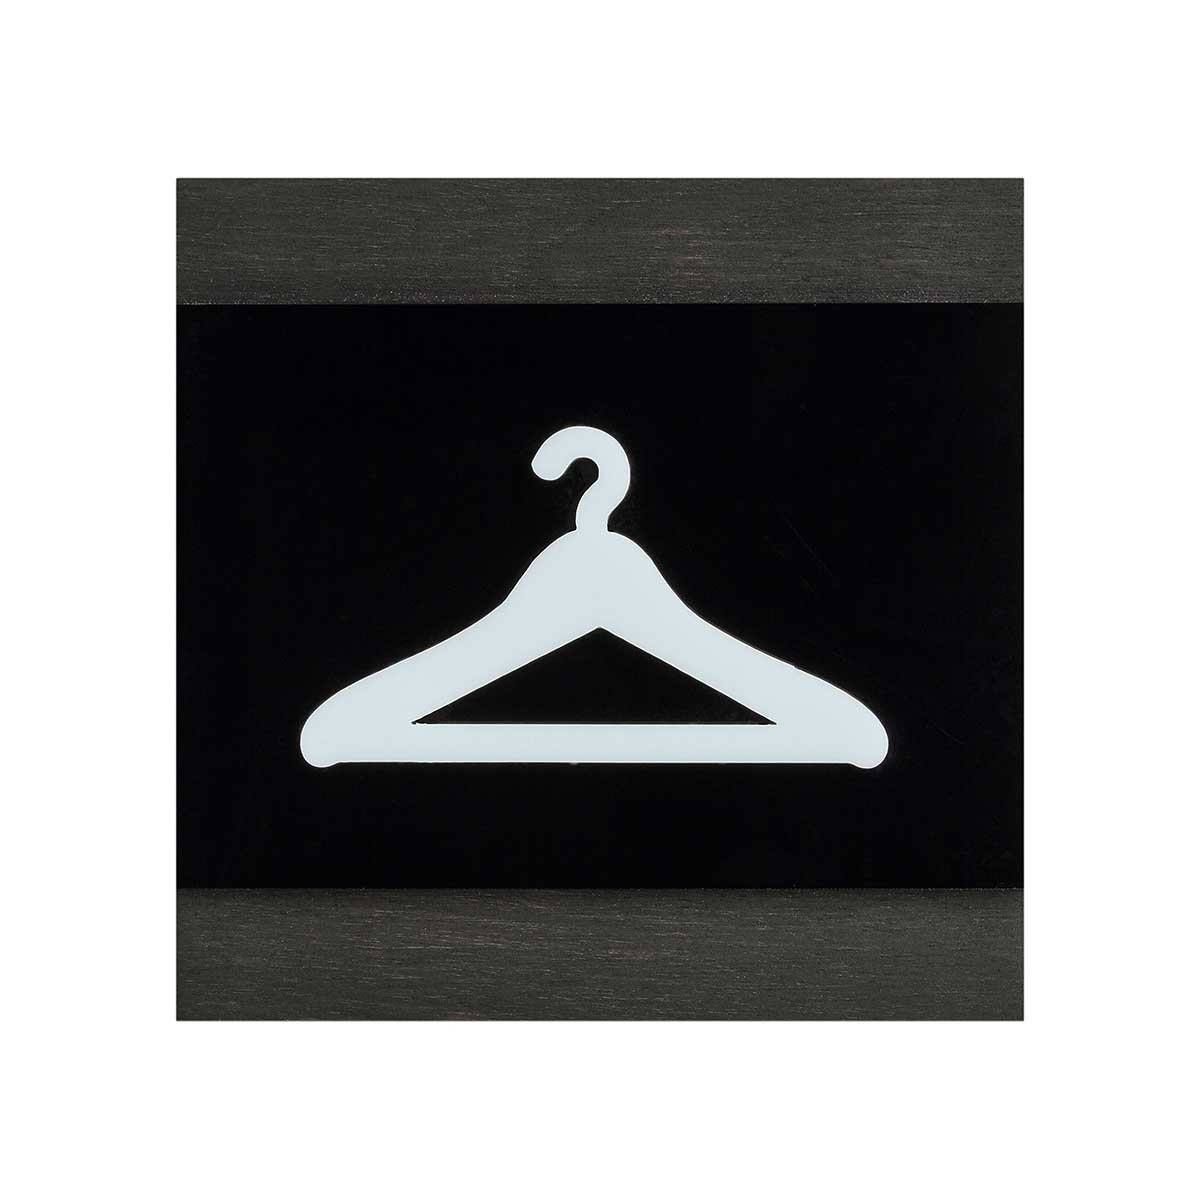 Wooden Hanger Pictogram for Wardrobe Information signs Anthracite Gray Bsign